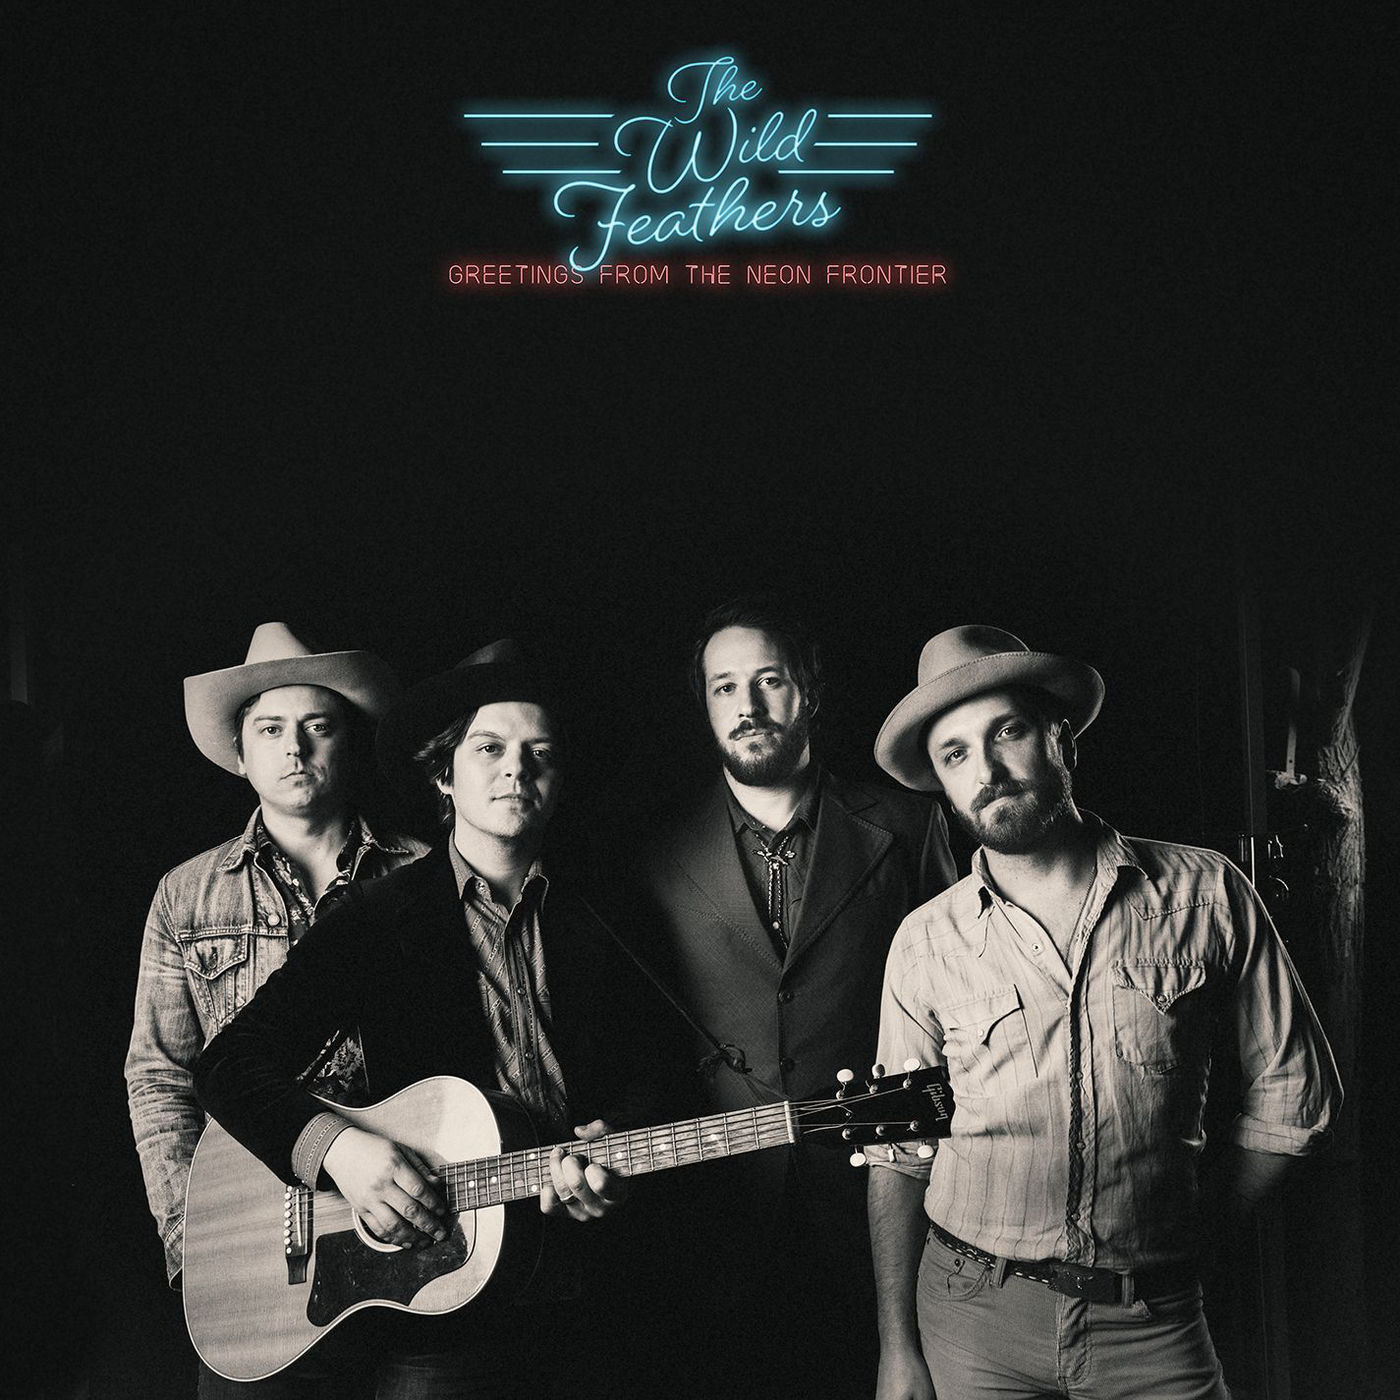 The Wild Feathers - Greetings from the Neon Frontier (2018) Album Info